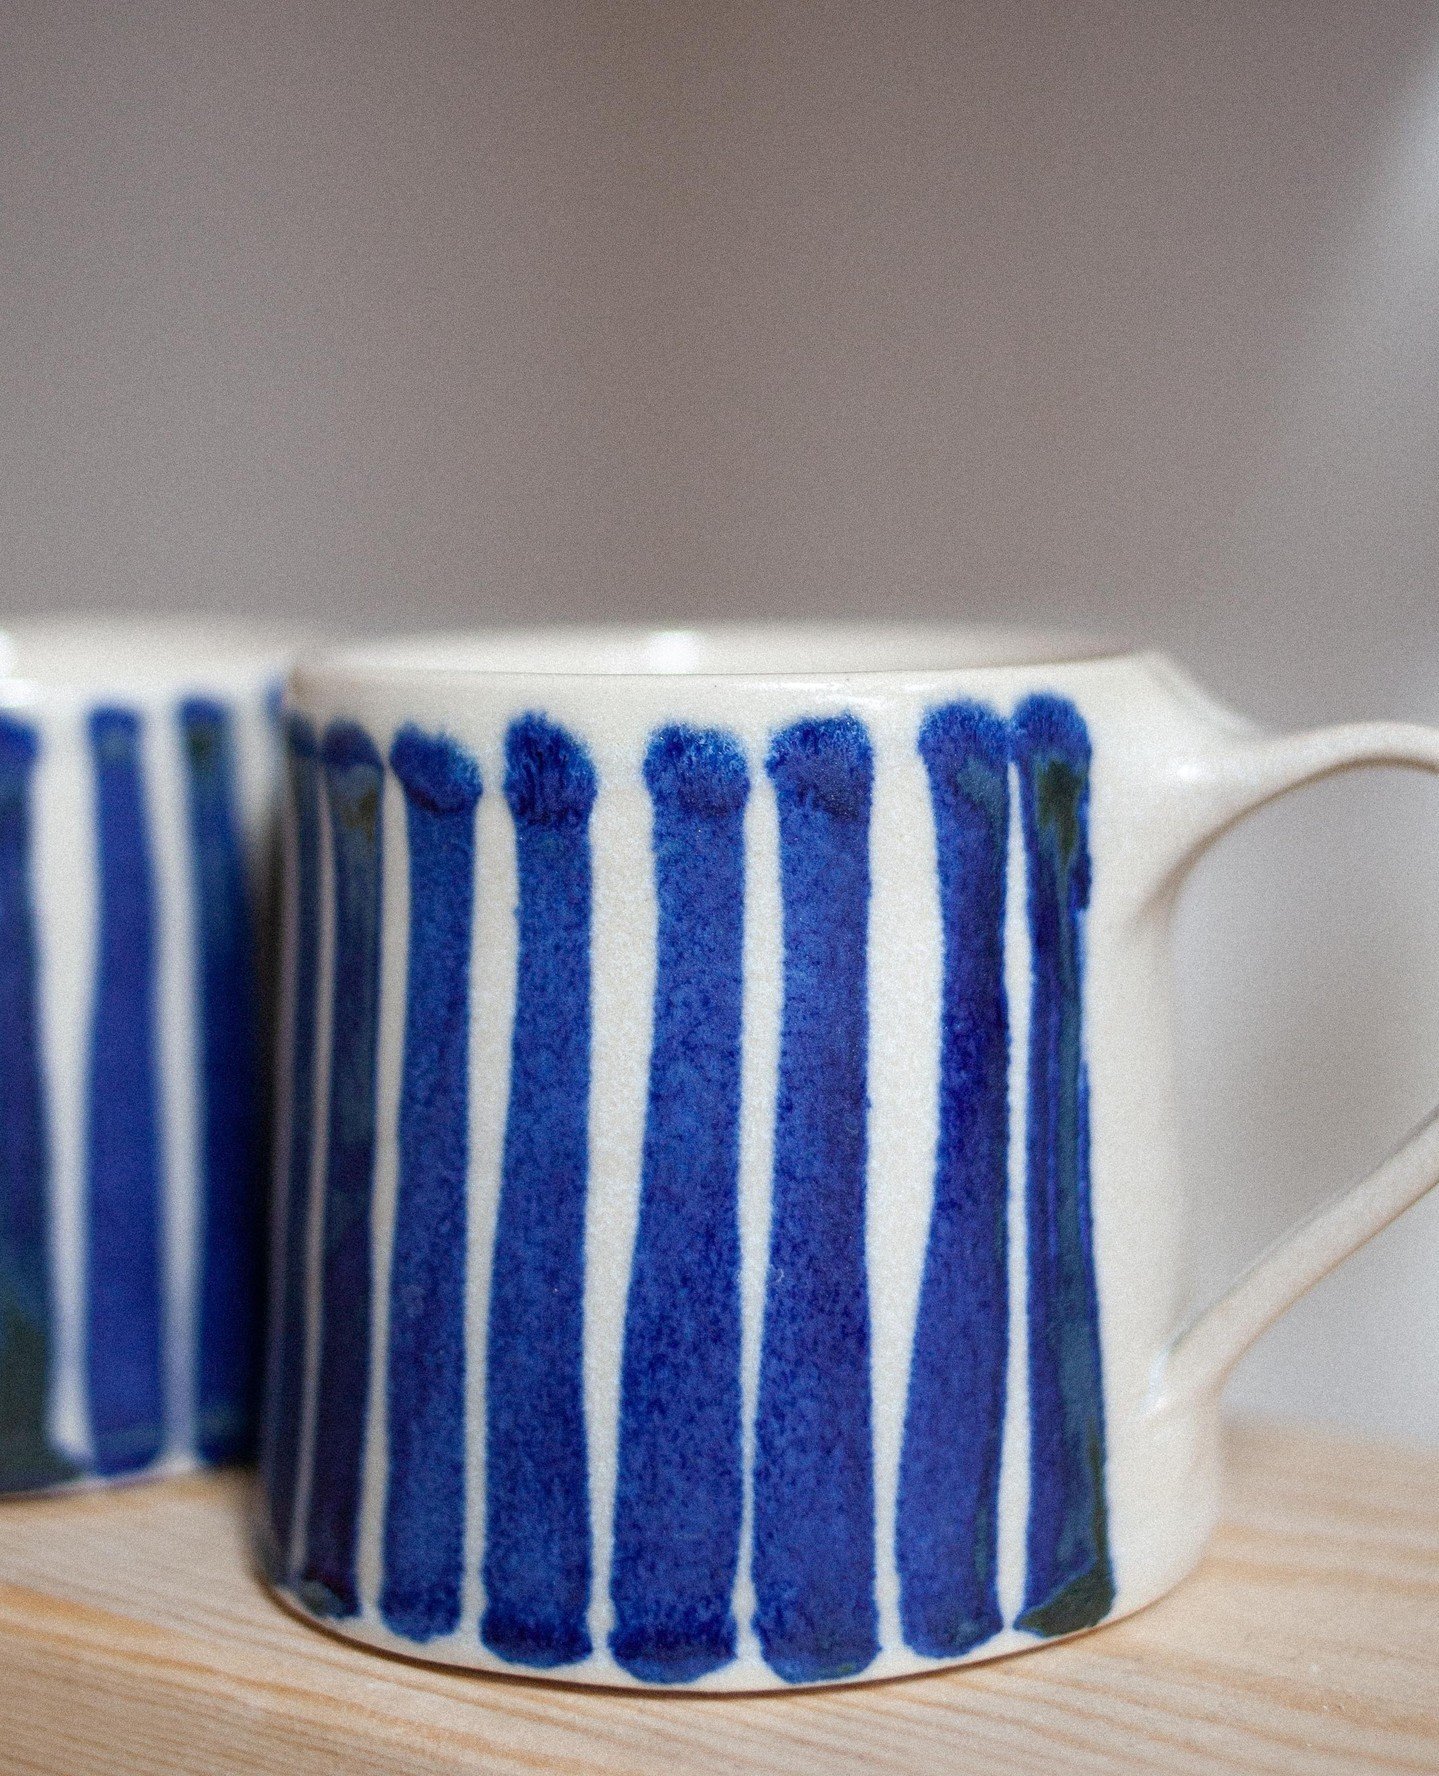 A wheel-thrown tall mug, with a high-gloss interior and rim, a variegated matte white exterior and hand-painted blue stripes in my classic cobalt wash design. So looking forward to sharing these new Summer blues with you soon.⁠
⁠
Cobalt update coming